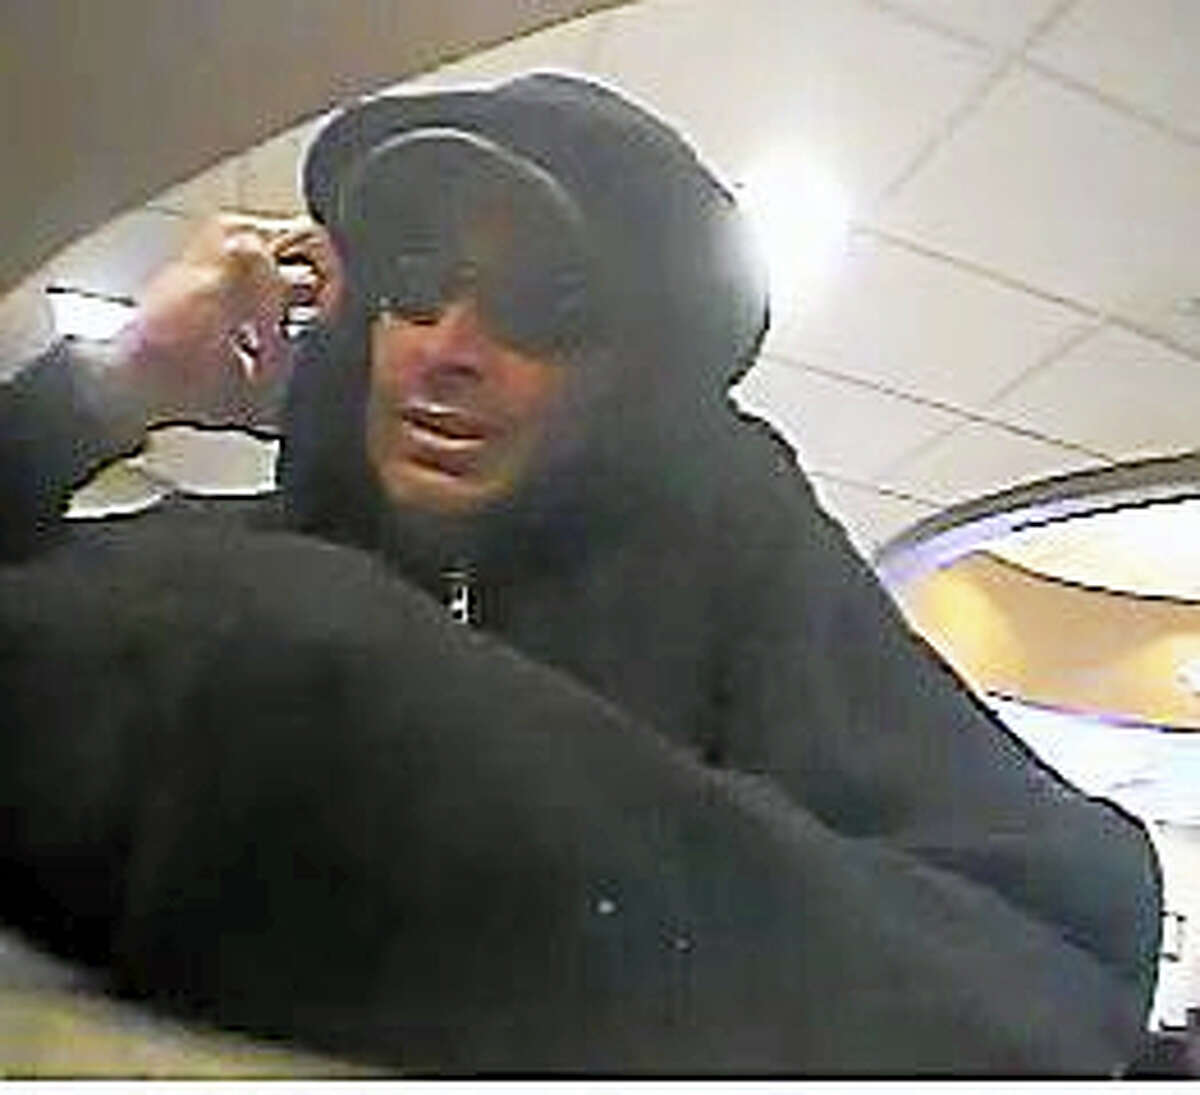 Robbery suspect on camera at United Bank in Colchester.